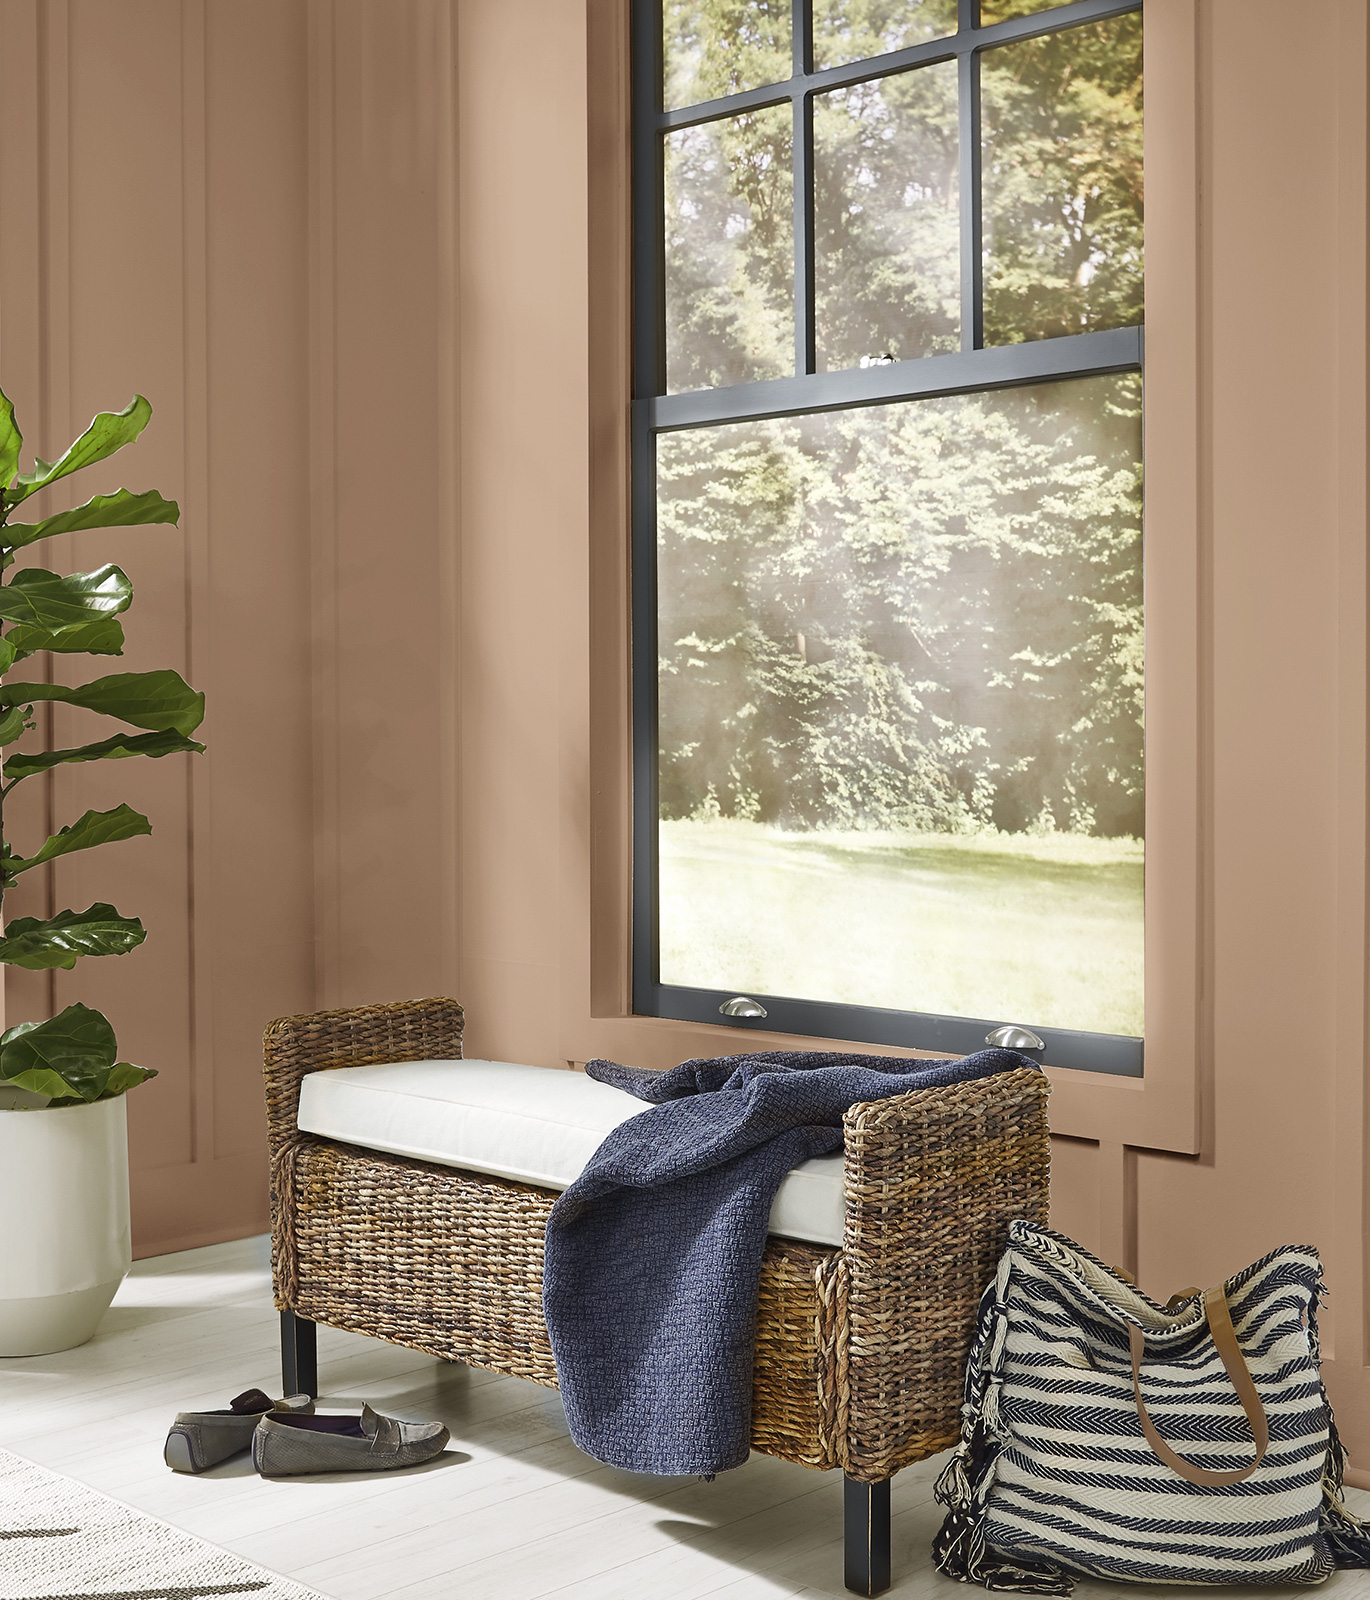 A wicker bench with a white cushion and blue blanket sitting in front of a tall window with walls painted in a beige paint color. The décor is casual and comfortable.